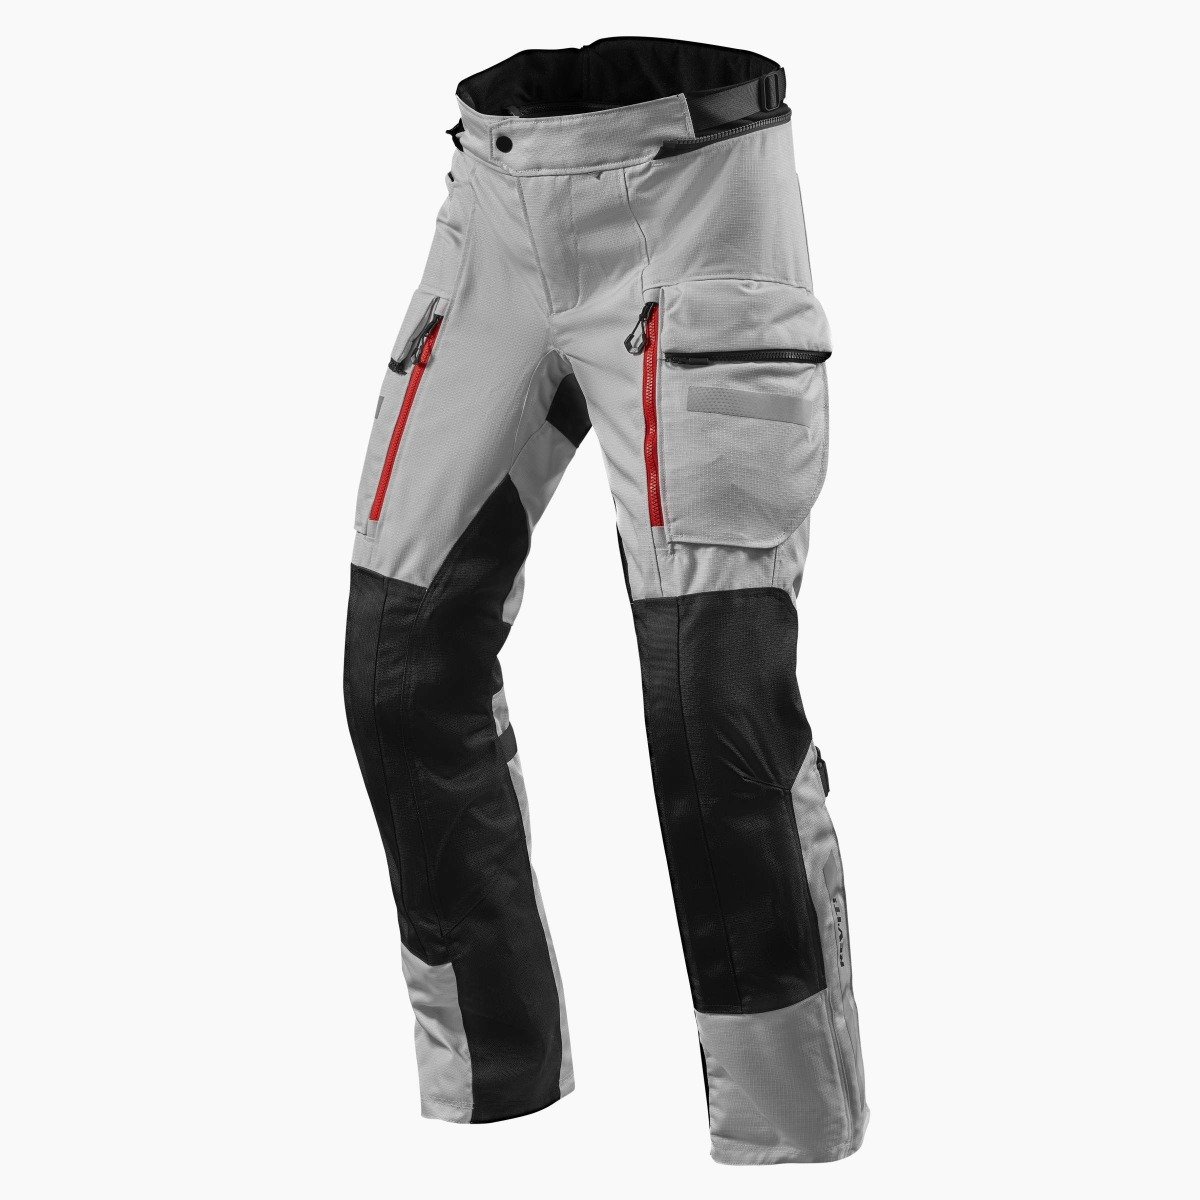 Image of REV'IT! Sand 4 H2O Standard Silver Black Motorcycle Pants Size M ID 8700001316422